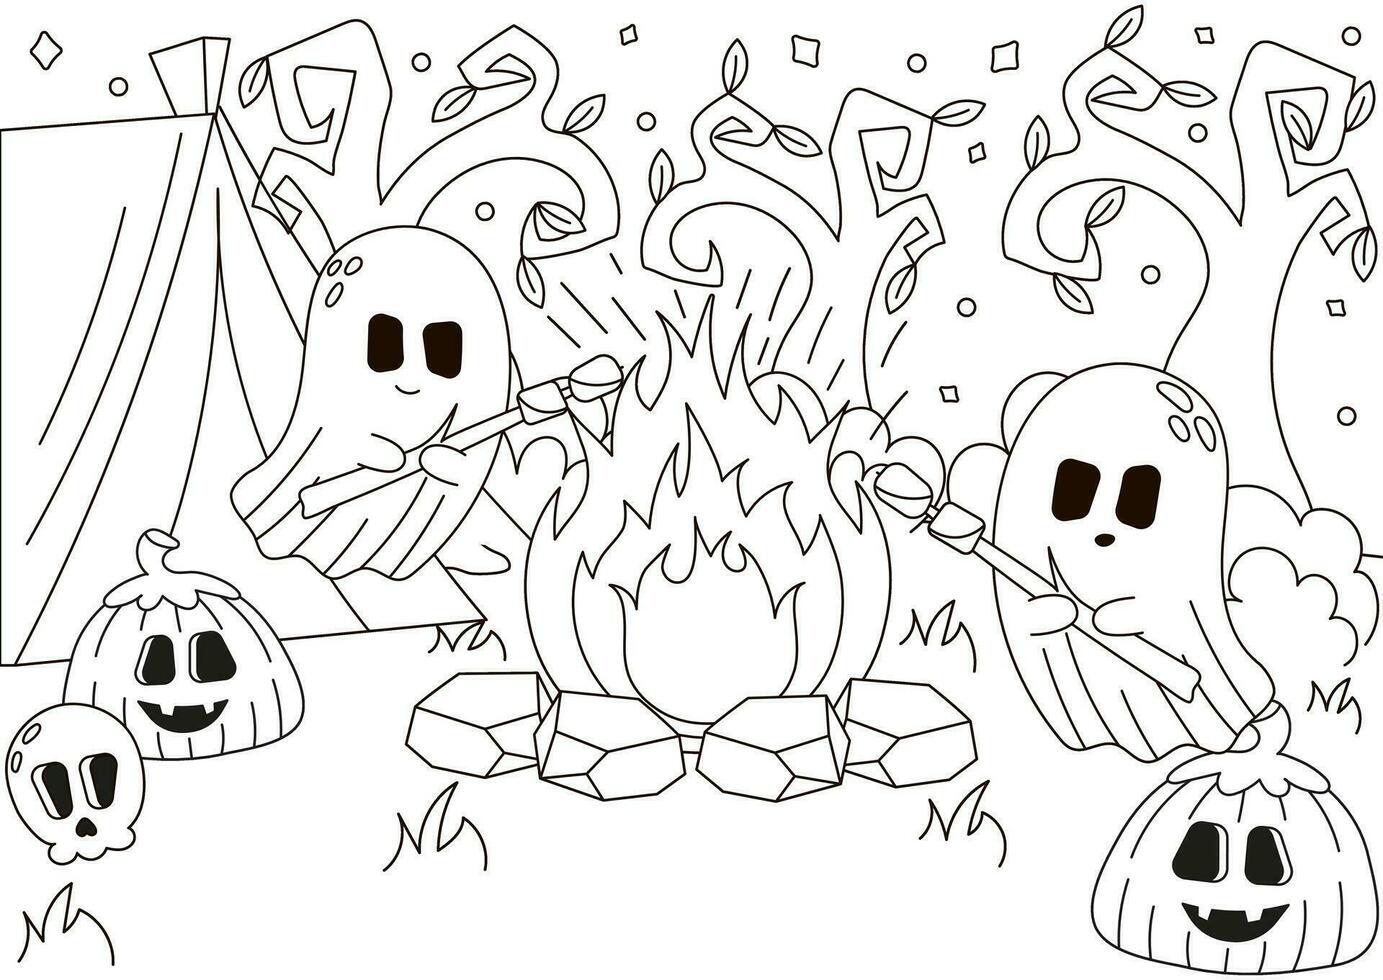 Halloween cozy outdoor activity, ghosts characters sitting around fire, camping coloring page for kids vector